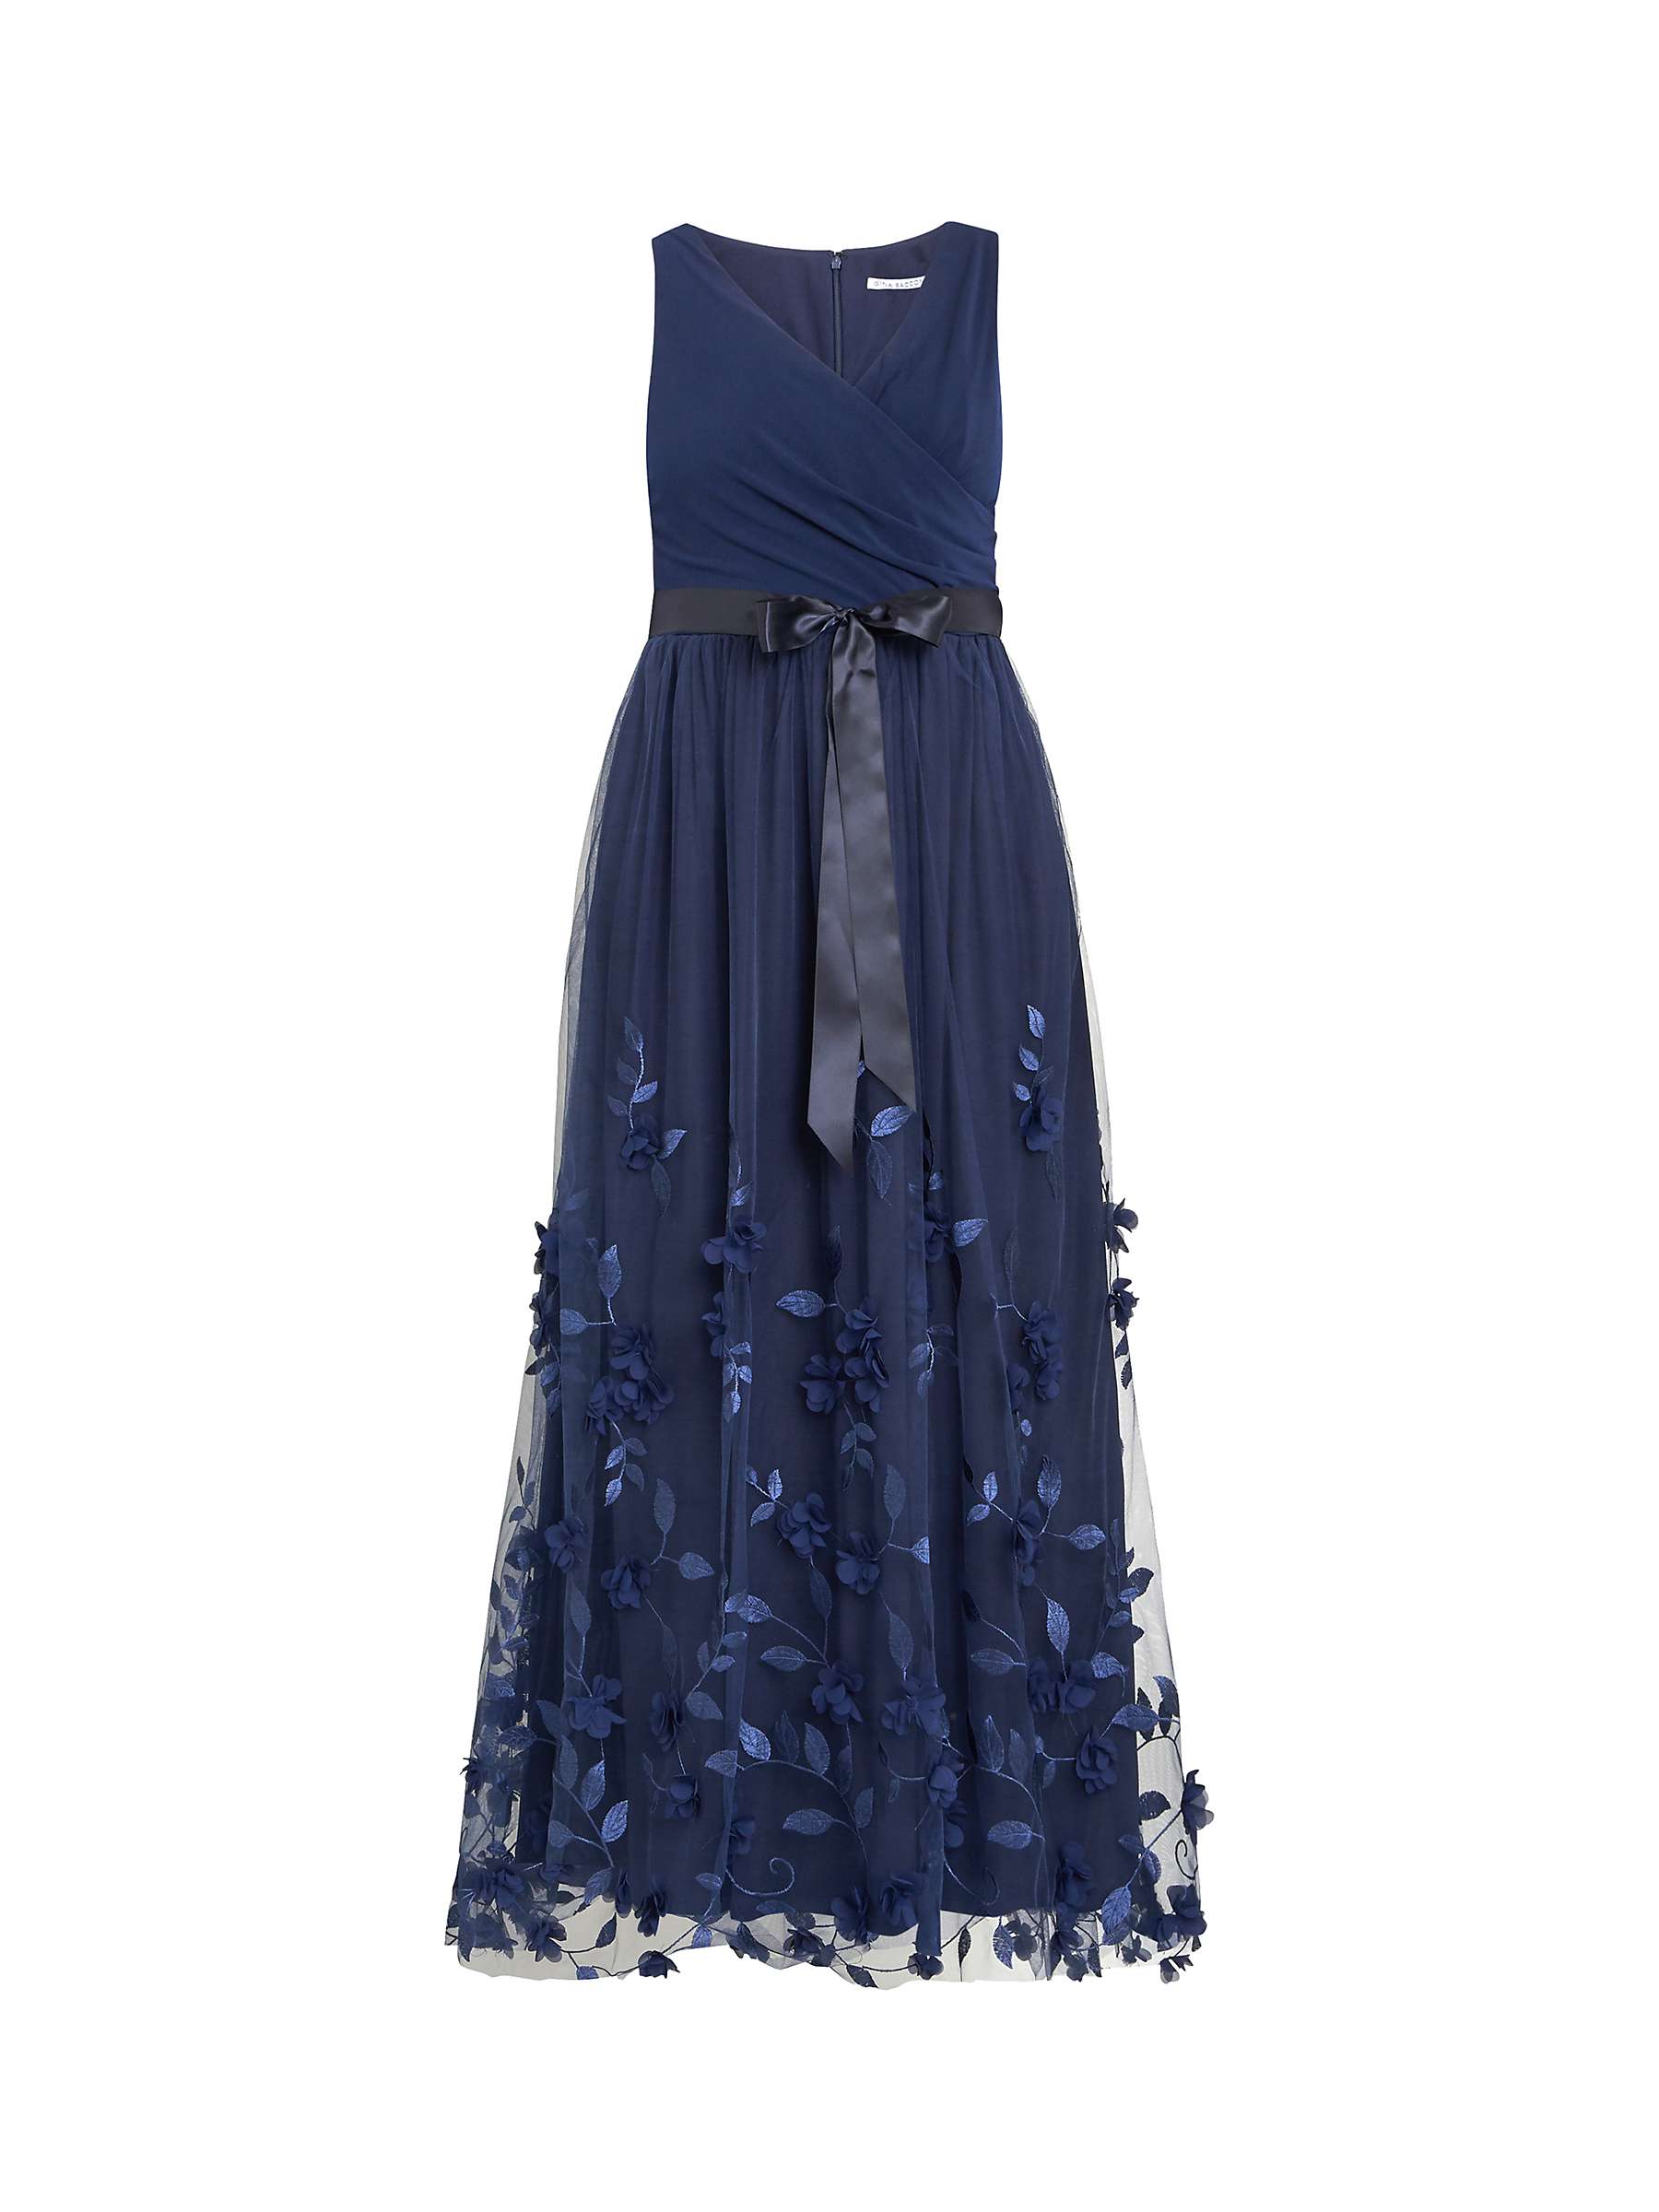 Buy Gina Bacconi Olyssia Leaf Embroidery Maxi Dress, Navy Online at johnlewis.com